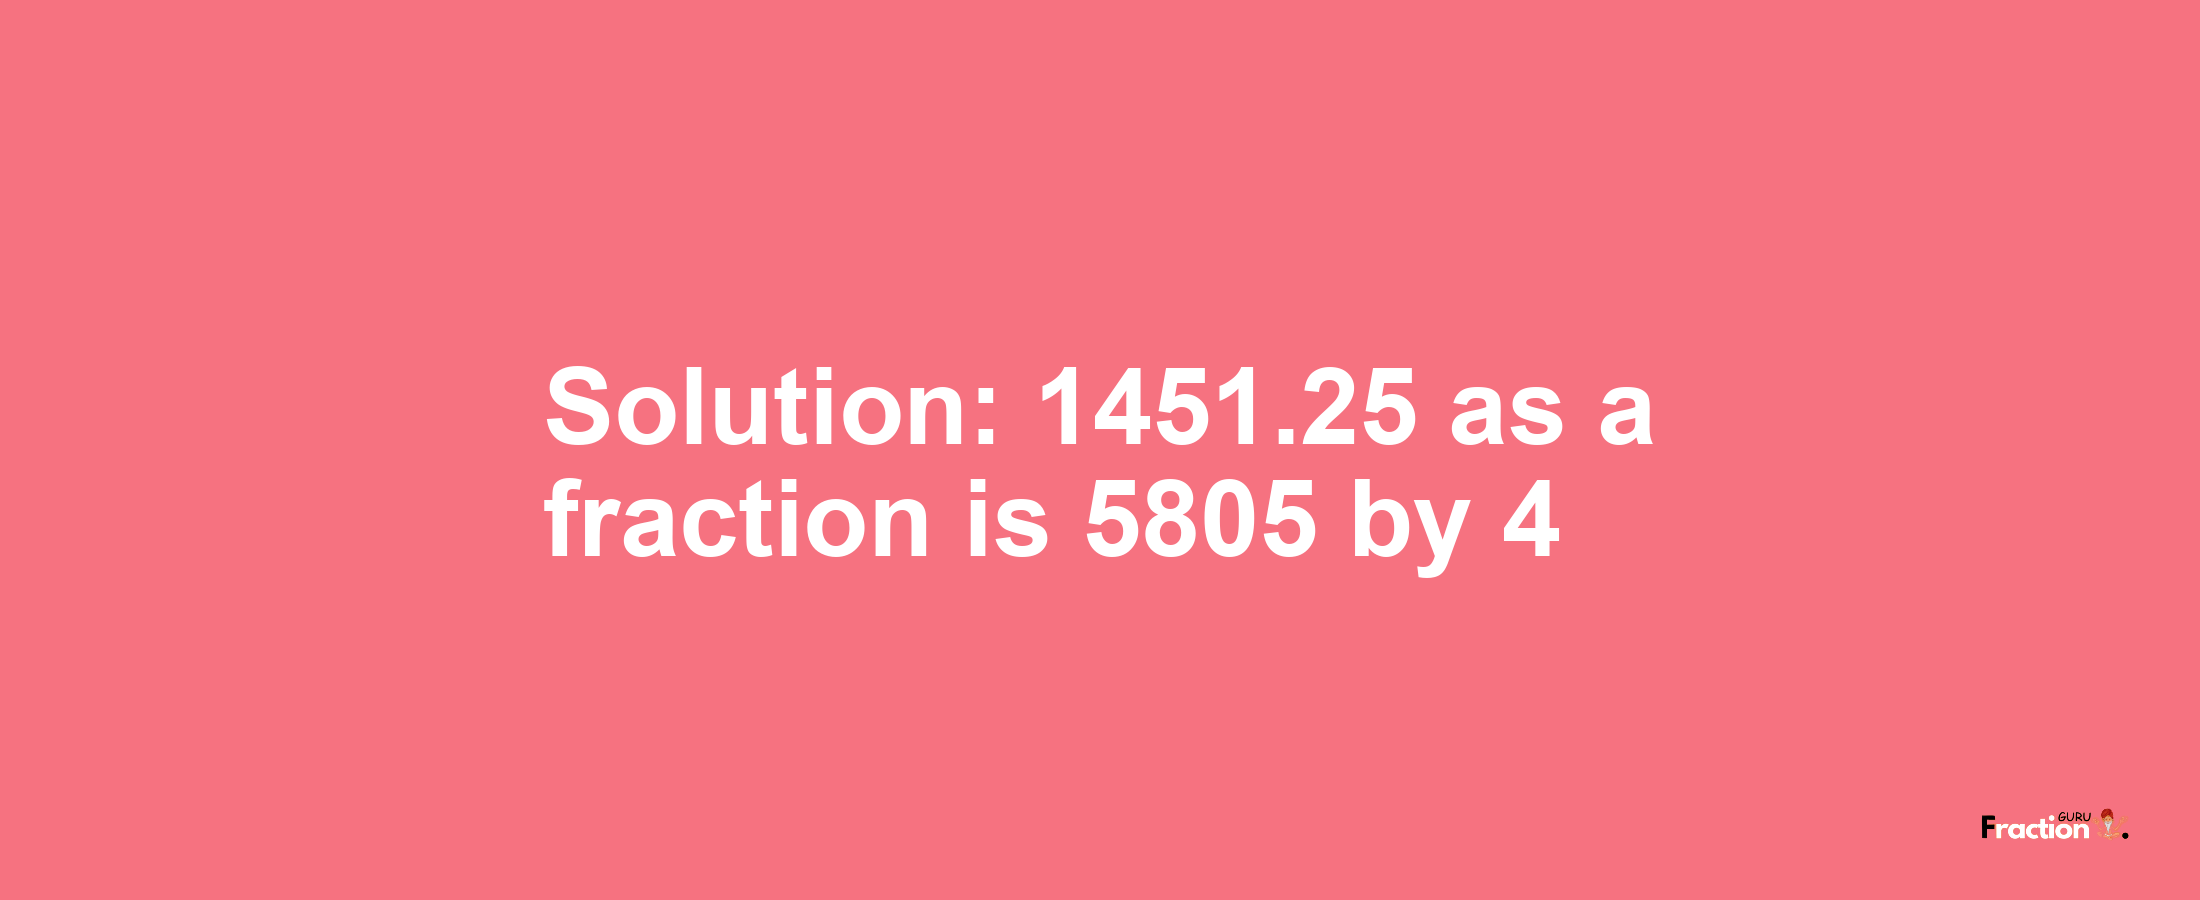 Solution:1451.25 as a fraction is 5805/4